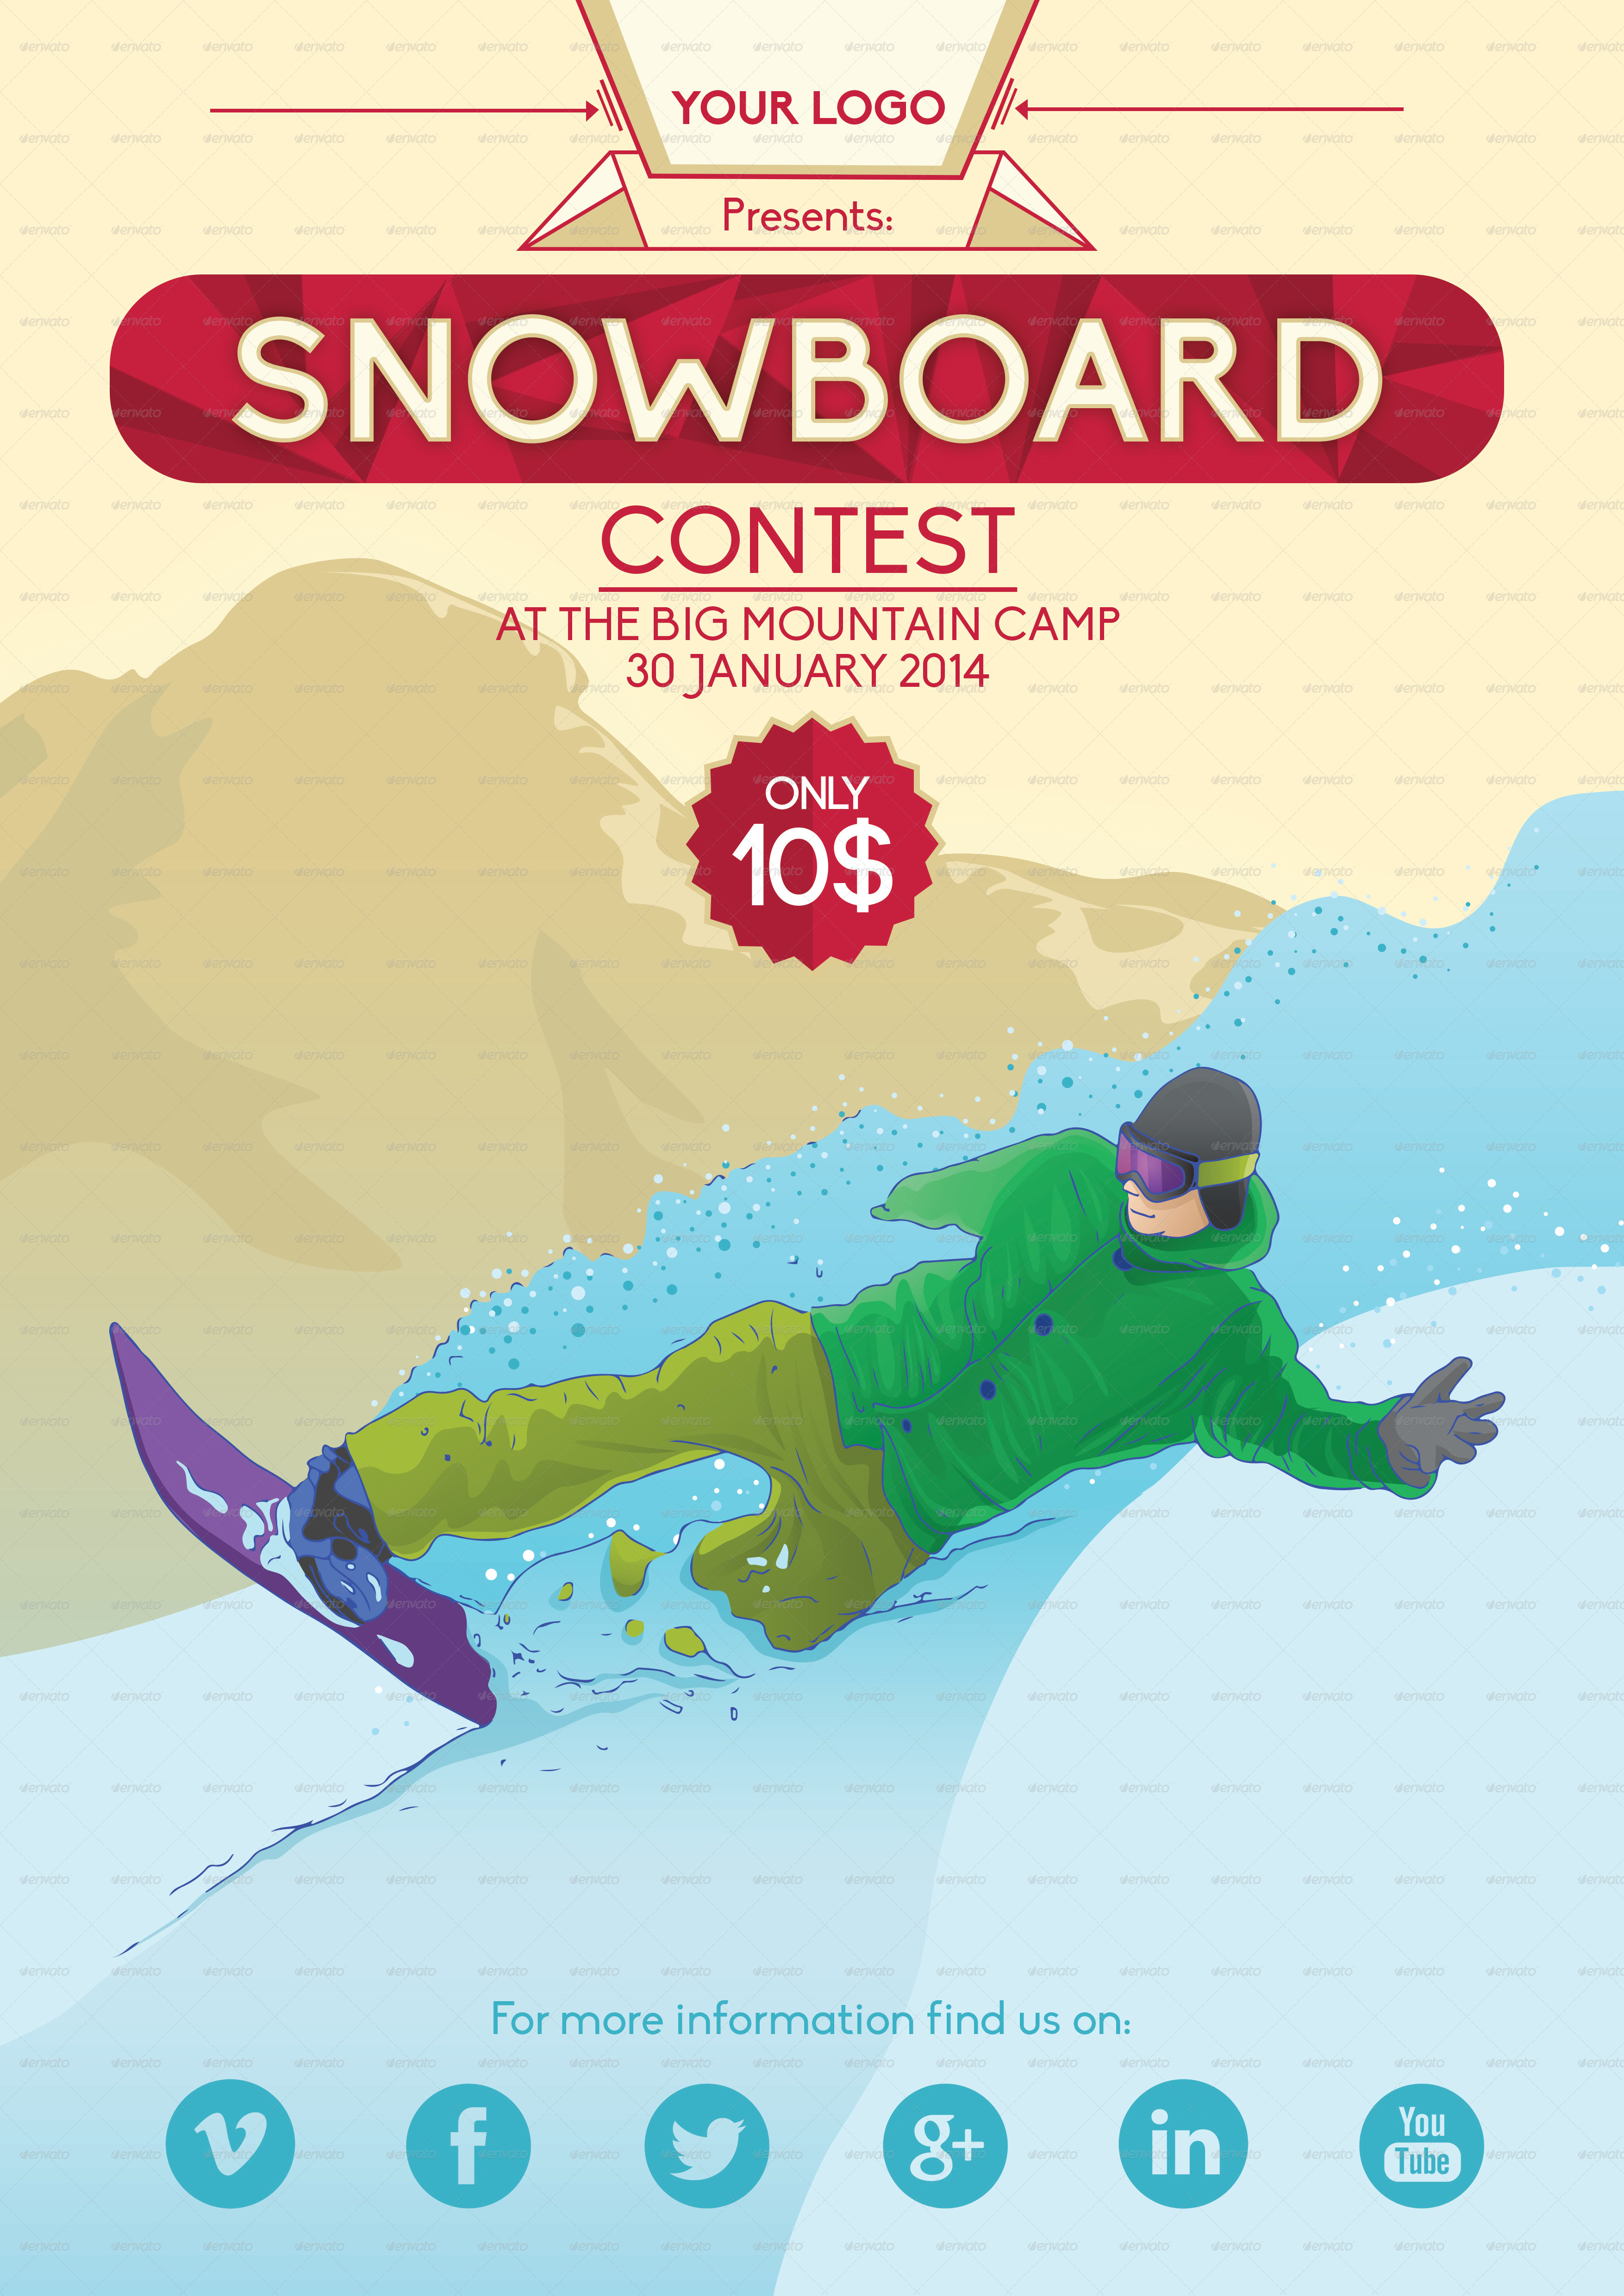 Snowboard Contest A3 Poster by DenisBors | GraphicRiver